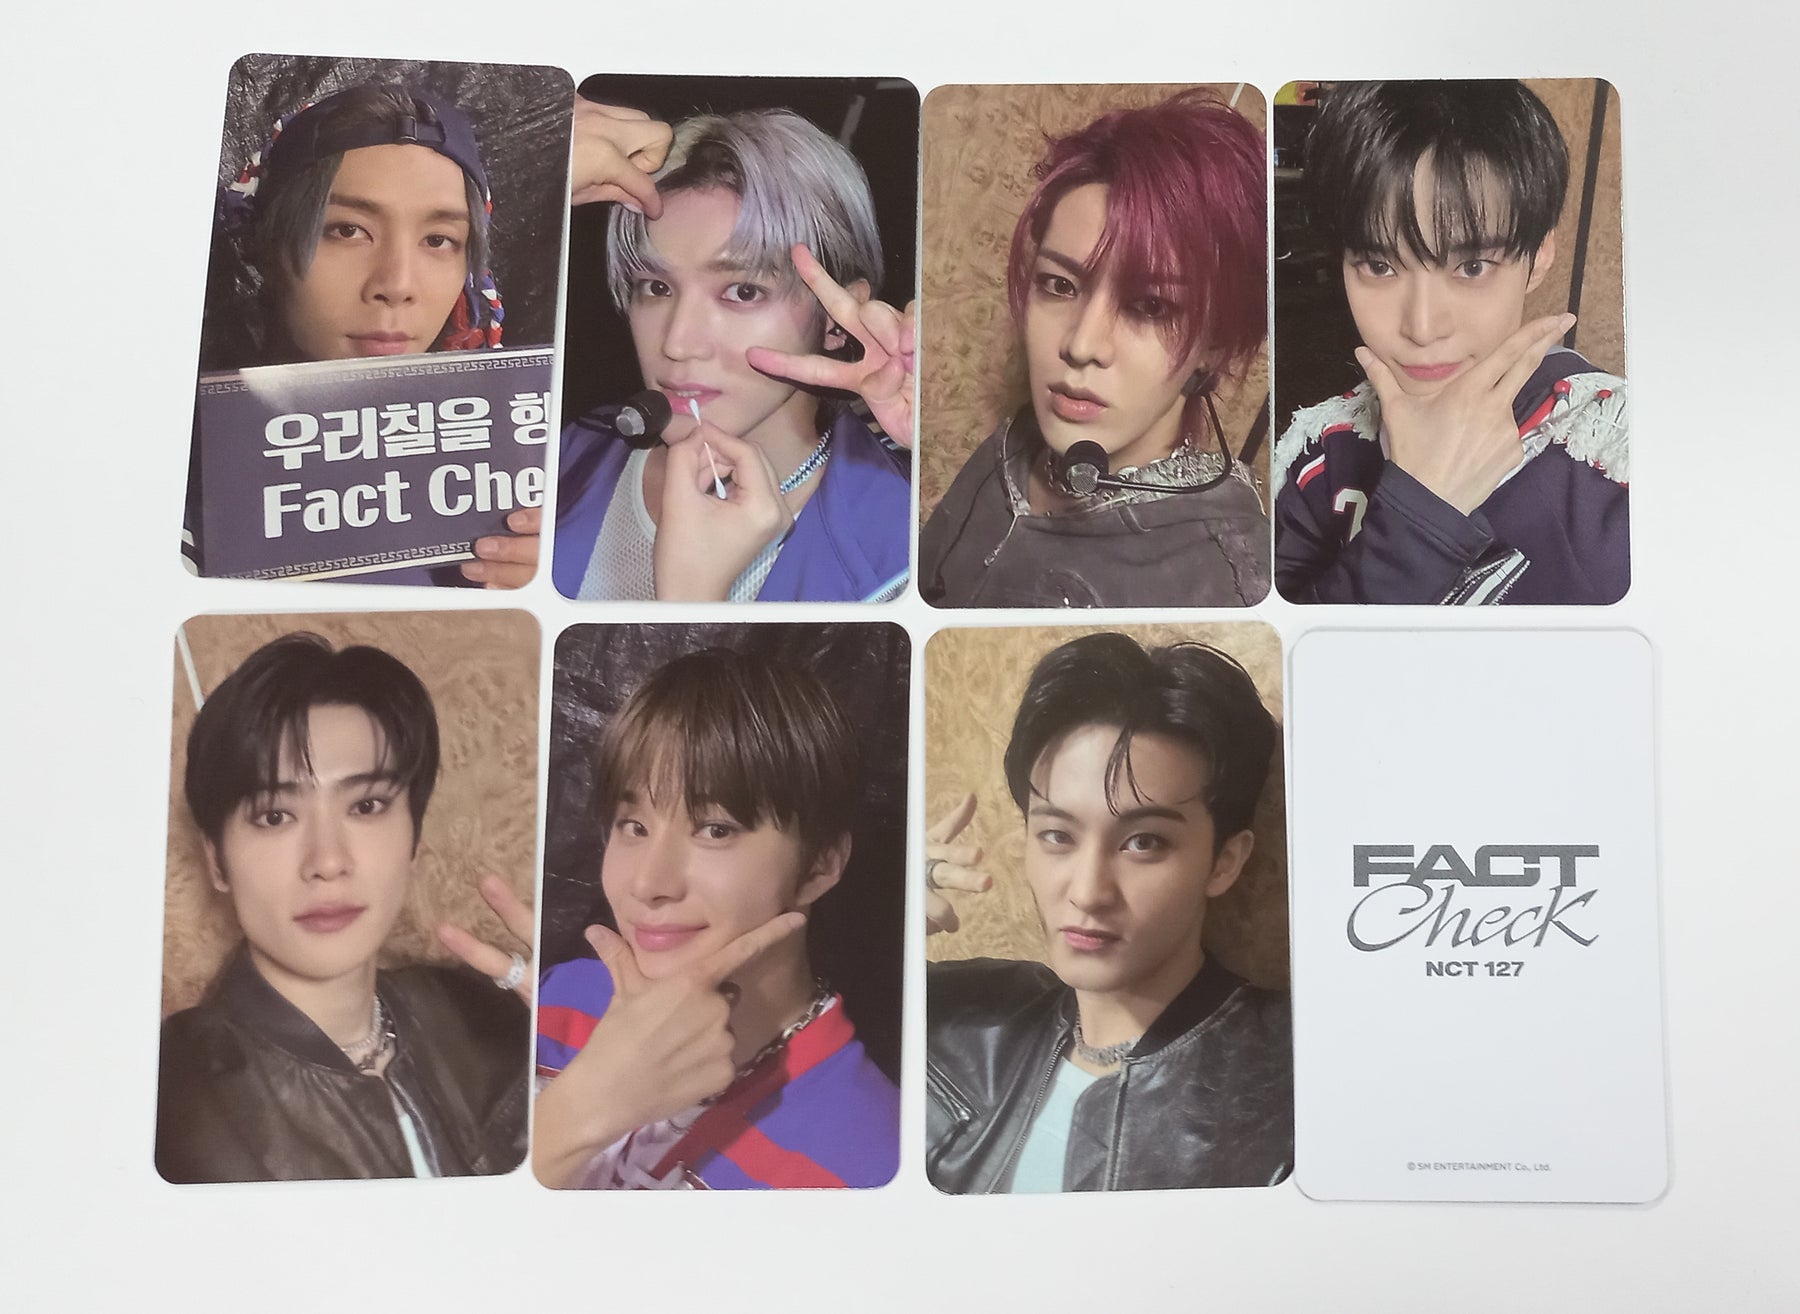 NCT 127 